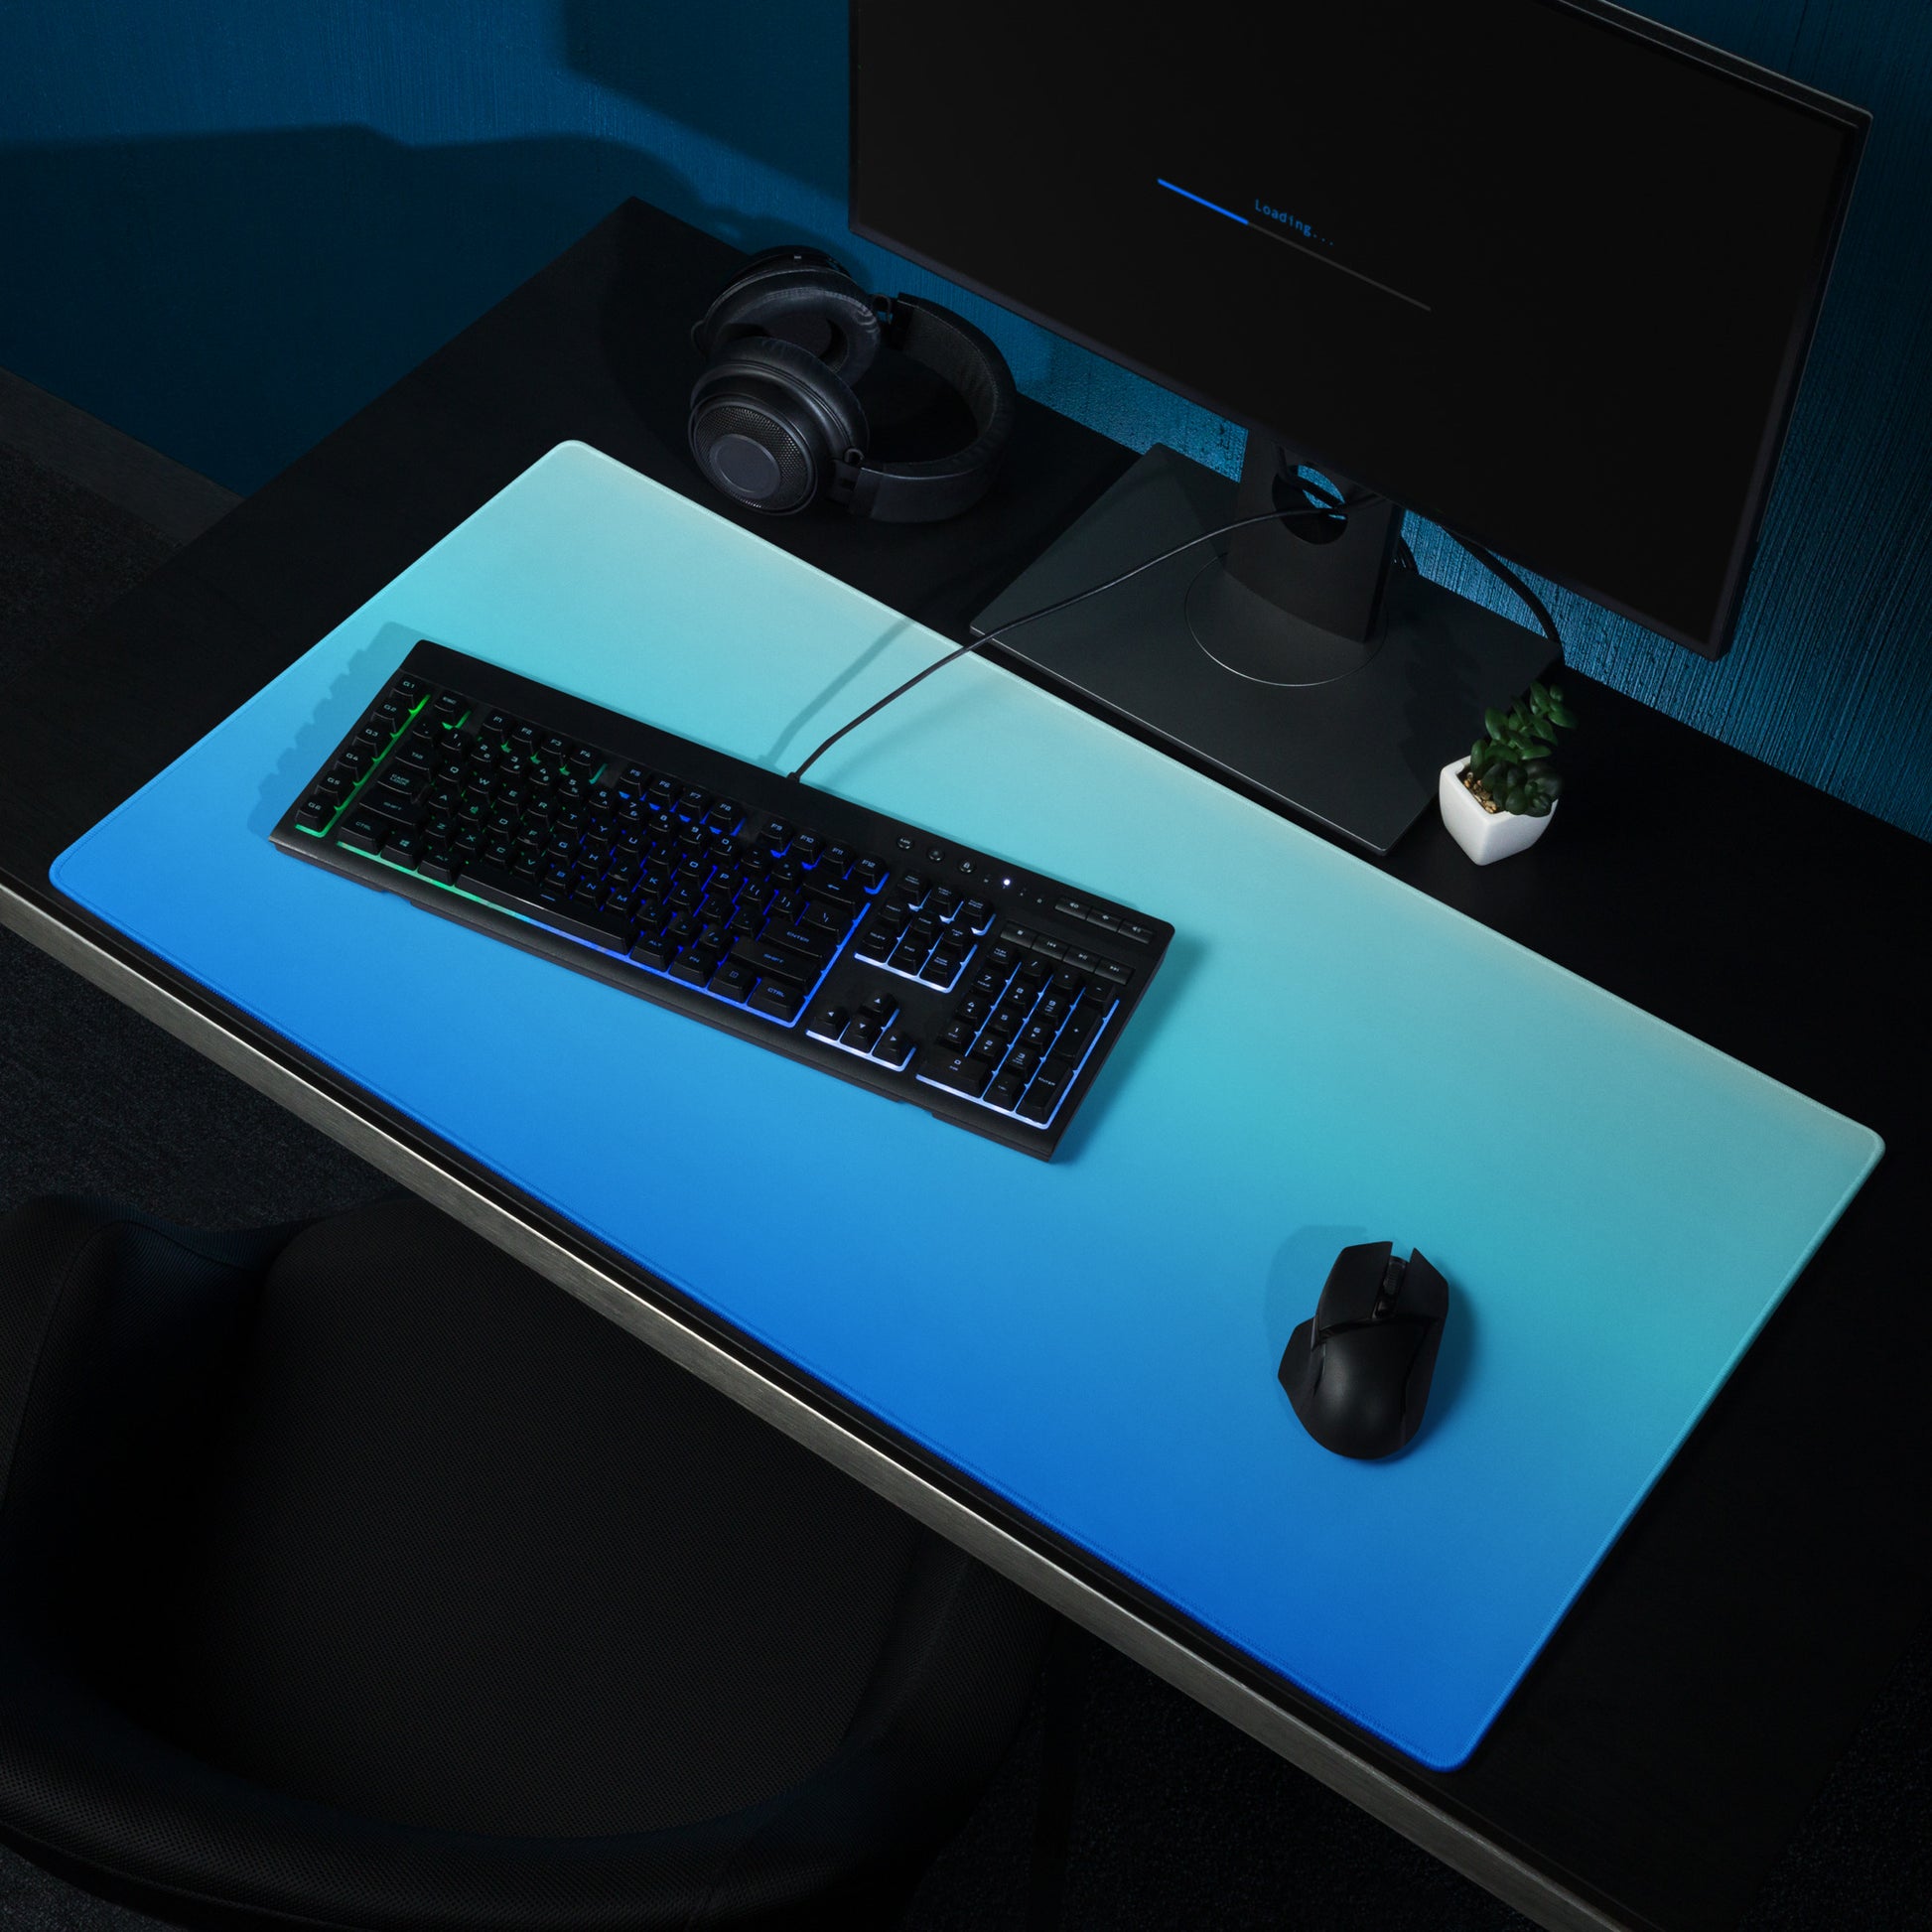 A 36" x 18" gaming desk pad with dark blue at the bottom and light blue at the top. It sits on a desk with a monitor, keyboard, and mouse.